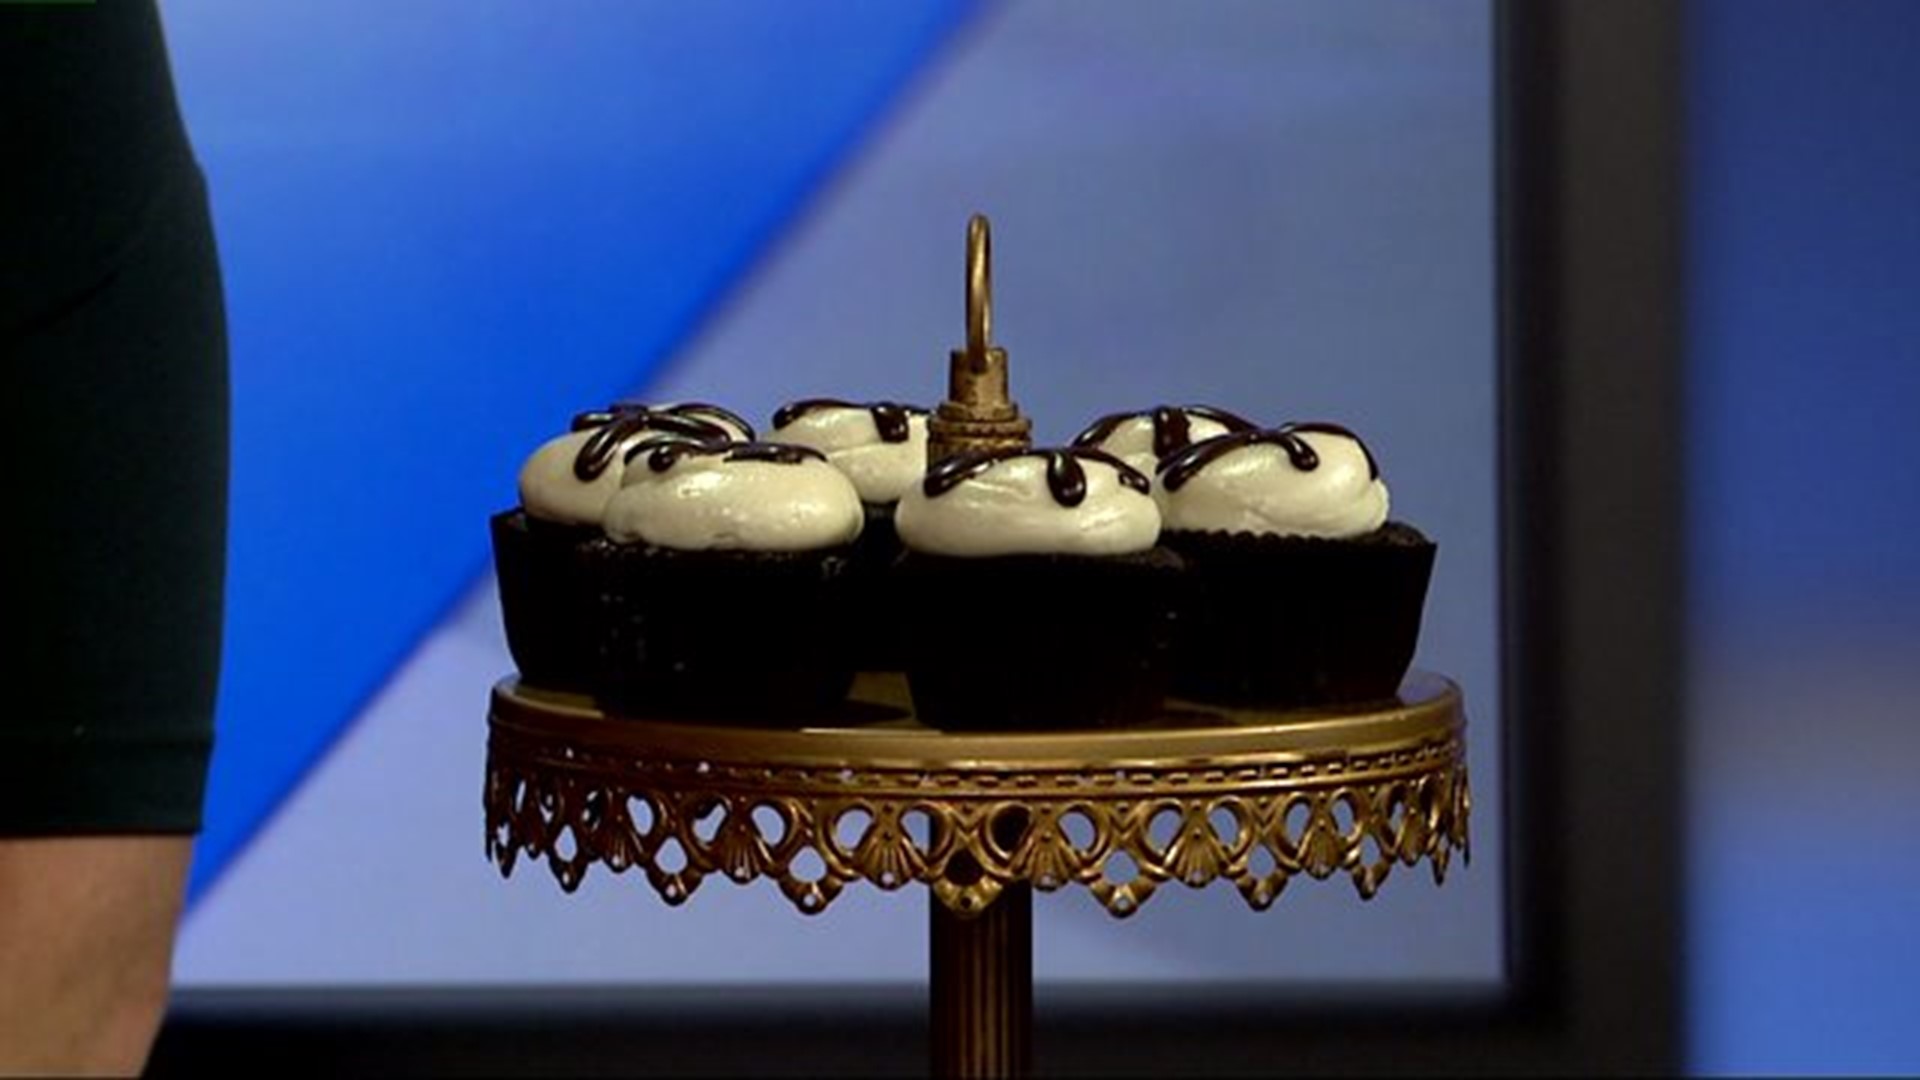 Saturday is National Chocolate Cupcake Day